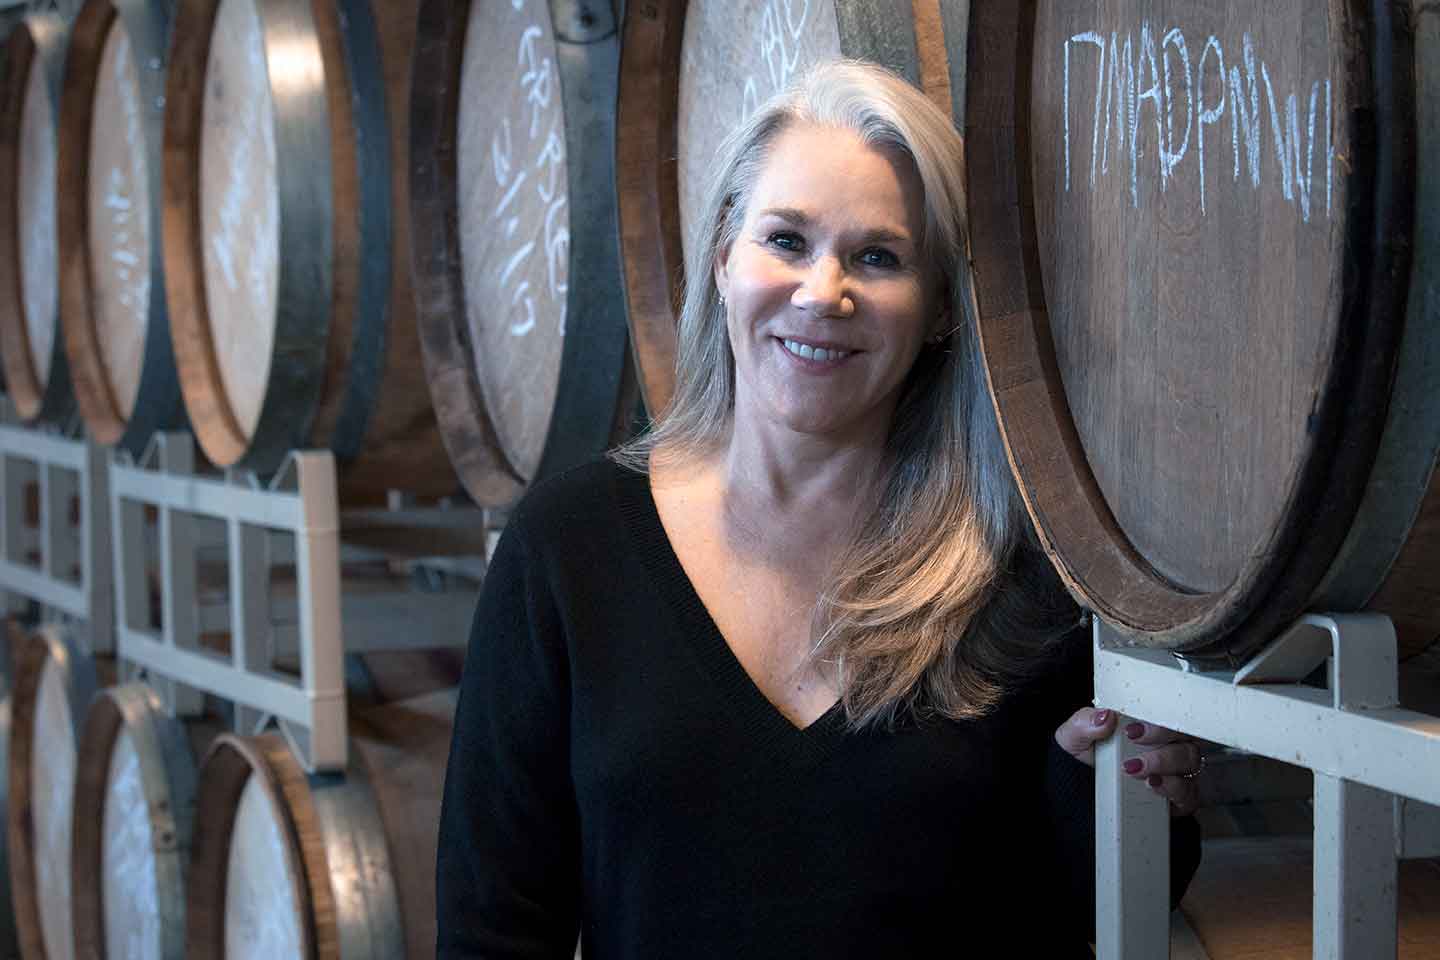 Winemaker Talk: Oregon Bubbly, Cooking and Community with Roco's